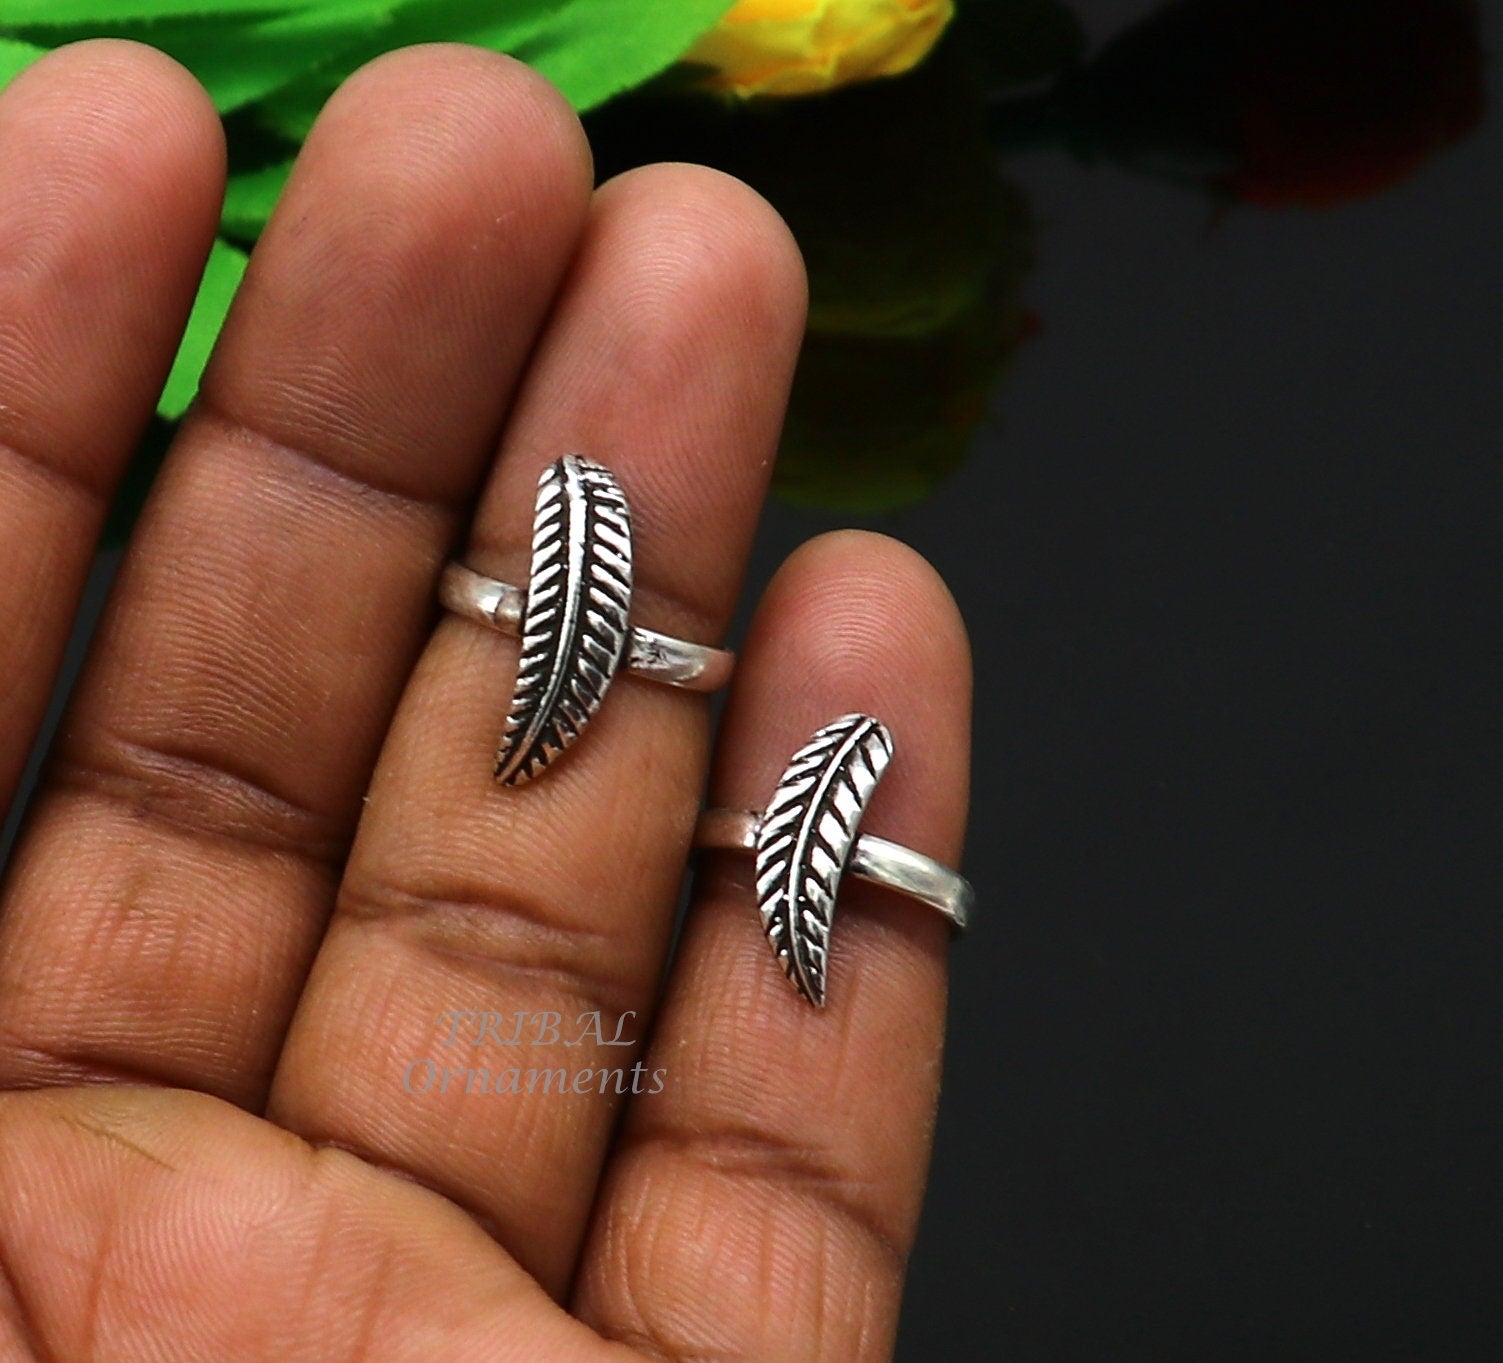 925 sterling silver amazing leaf design handmade toe ring, toe band stylish modern women's brides jewelry, india traditional jewelry ytr47 - TRIBAL ORNAMENTS